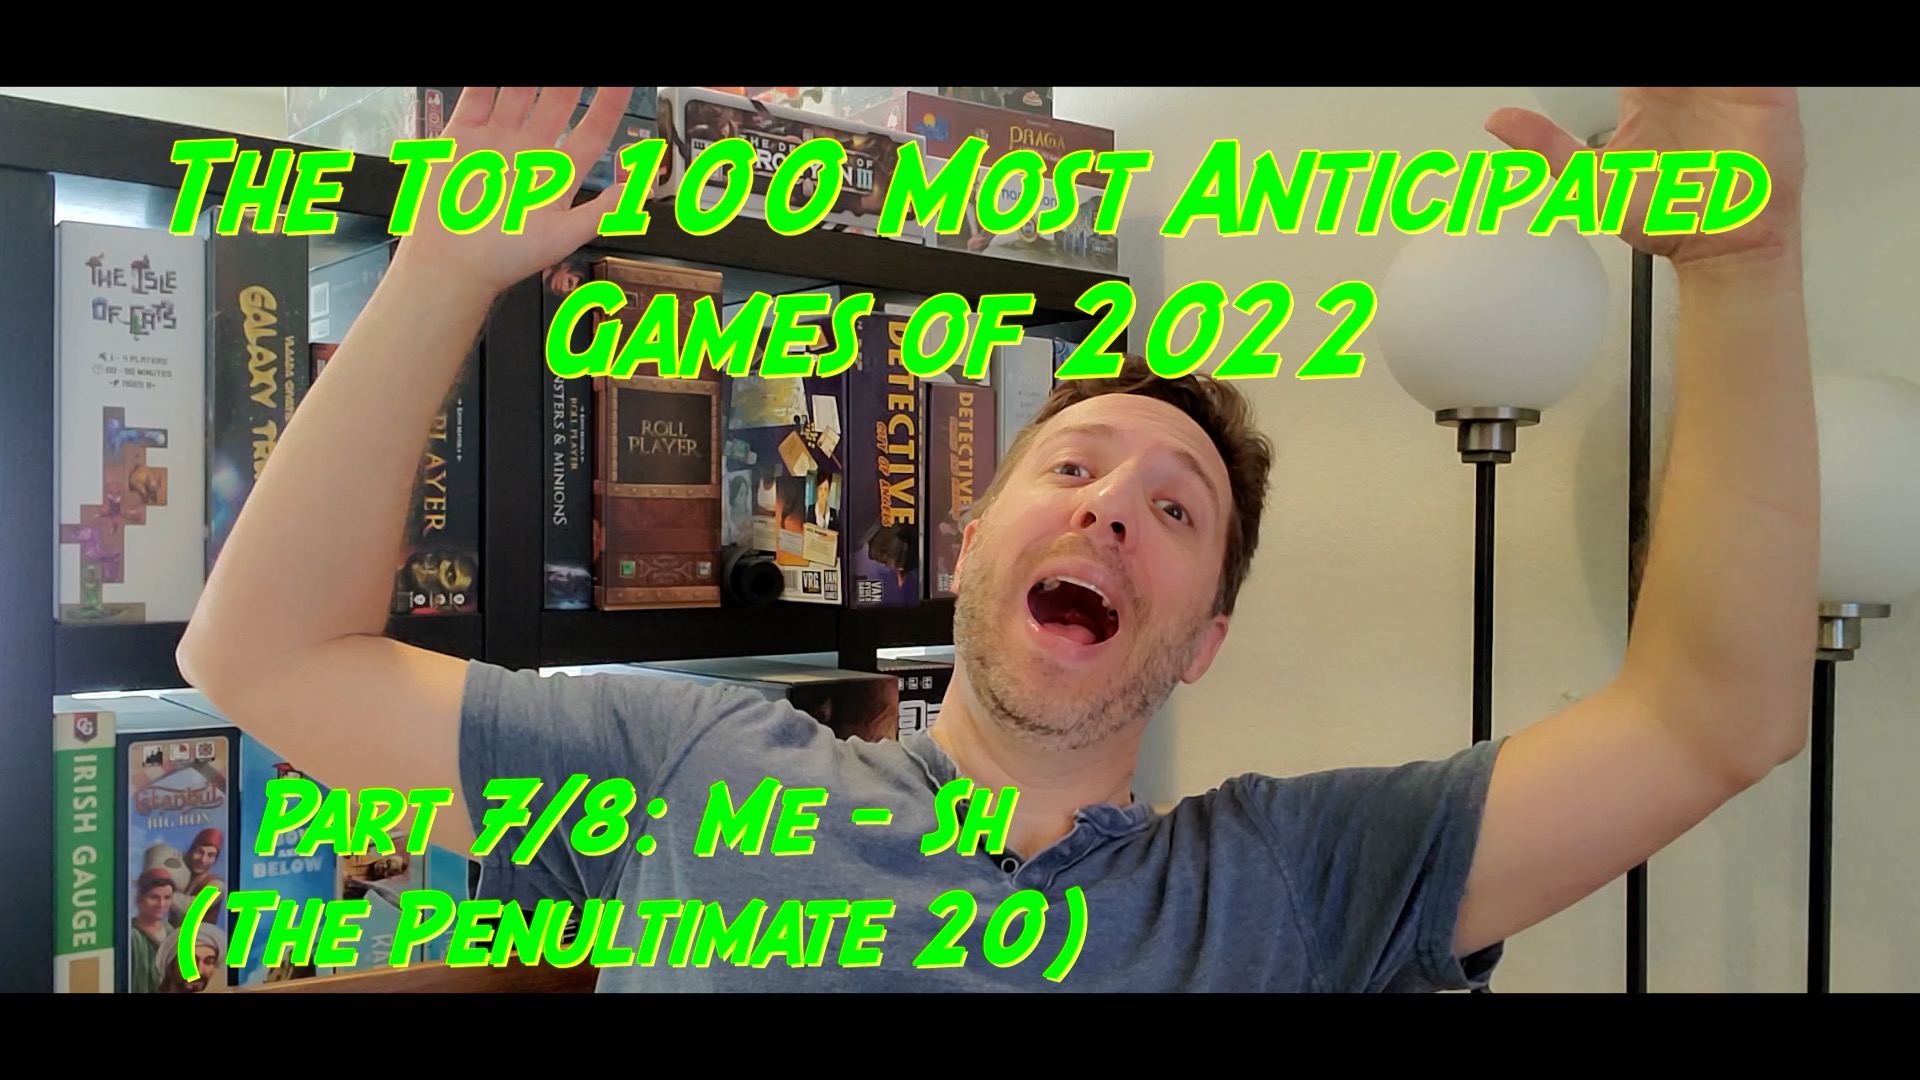 The Top 100 Most-Anticipated Games of 2022, Part 7/8: Me – Sh (The Penultimate 20)